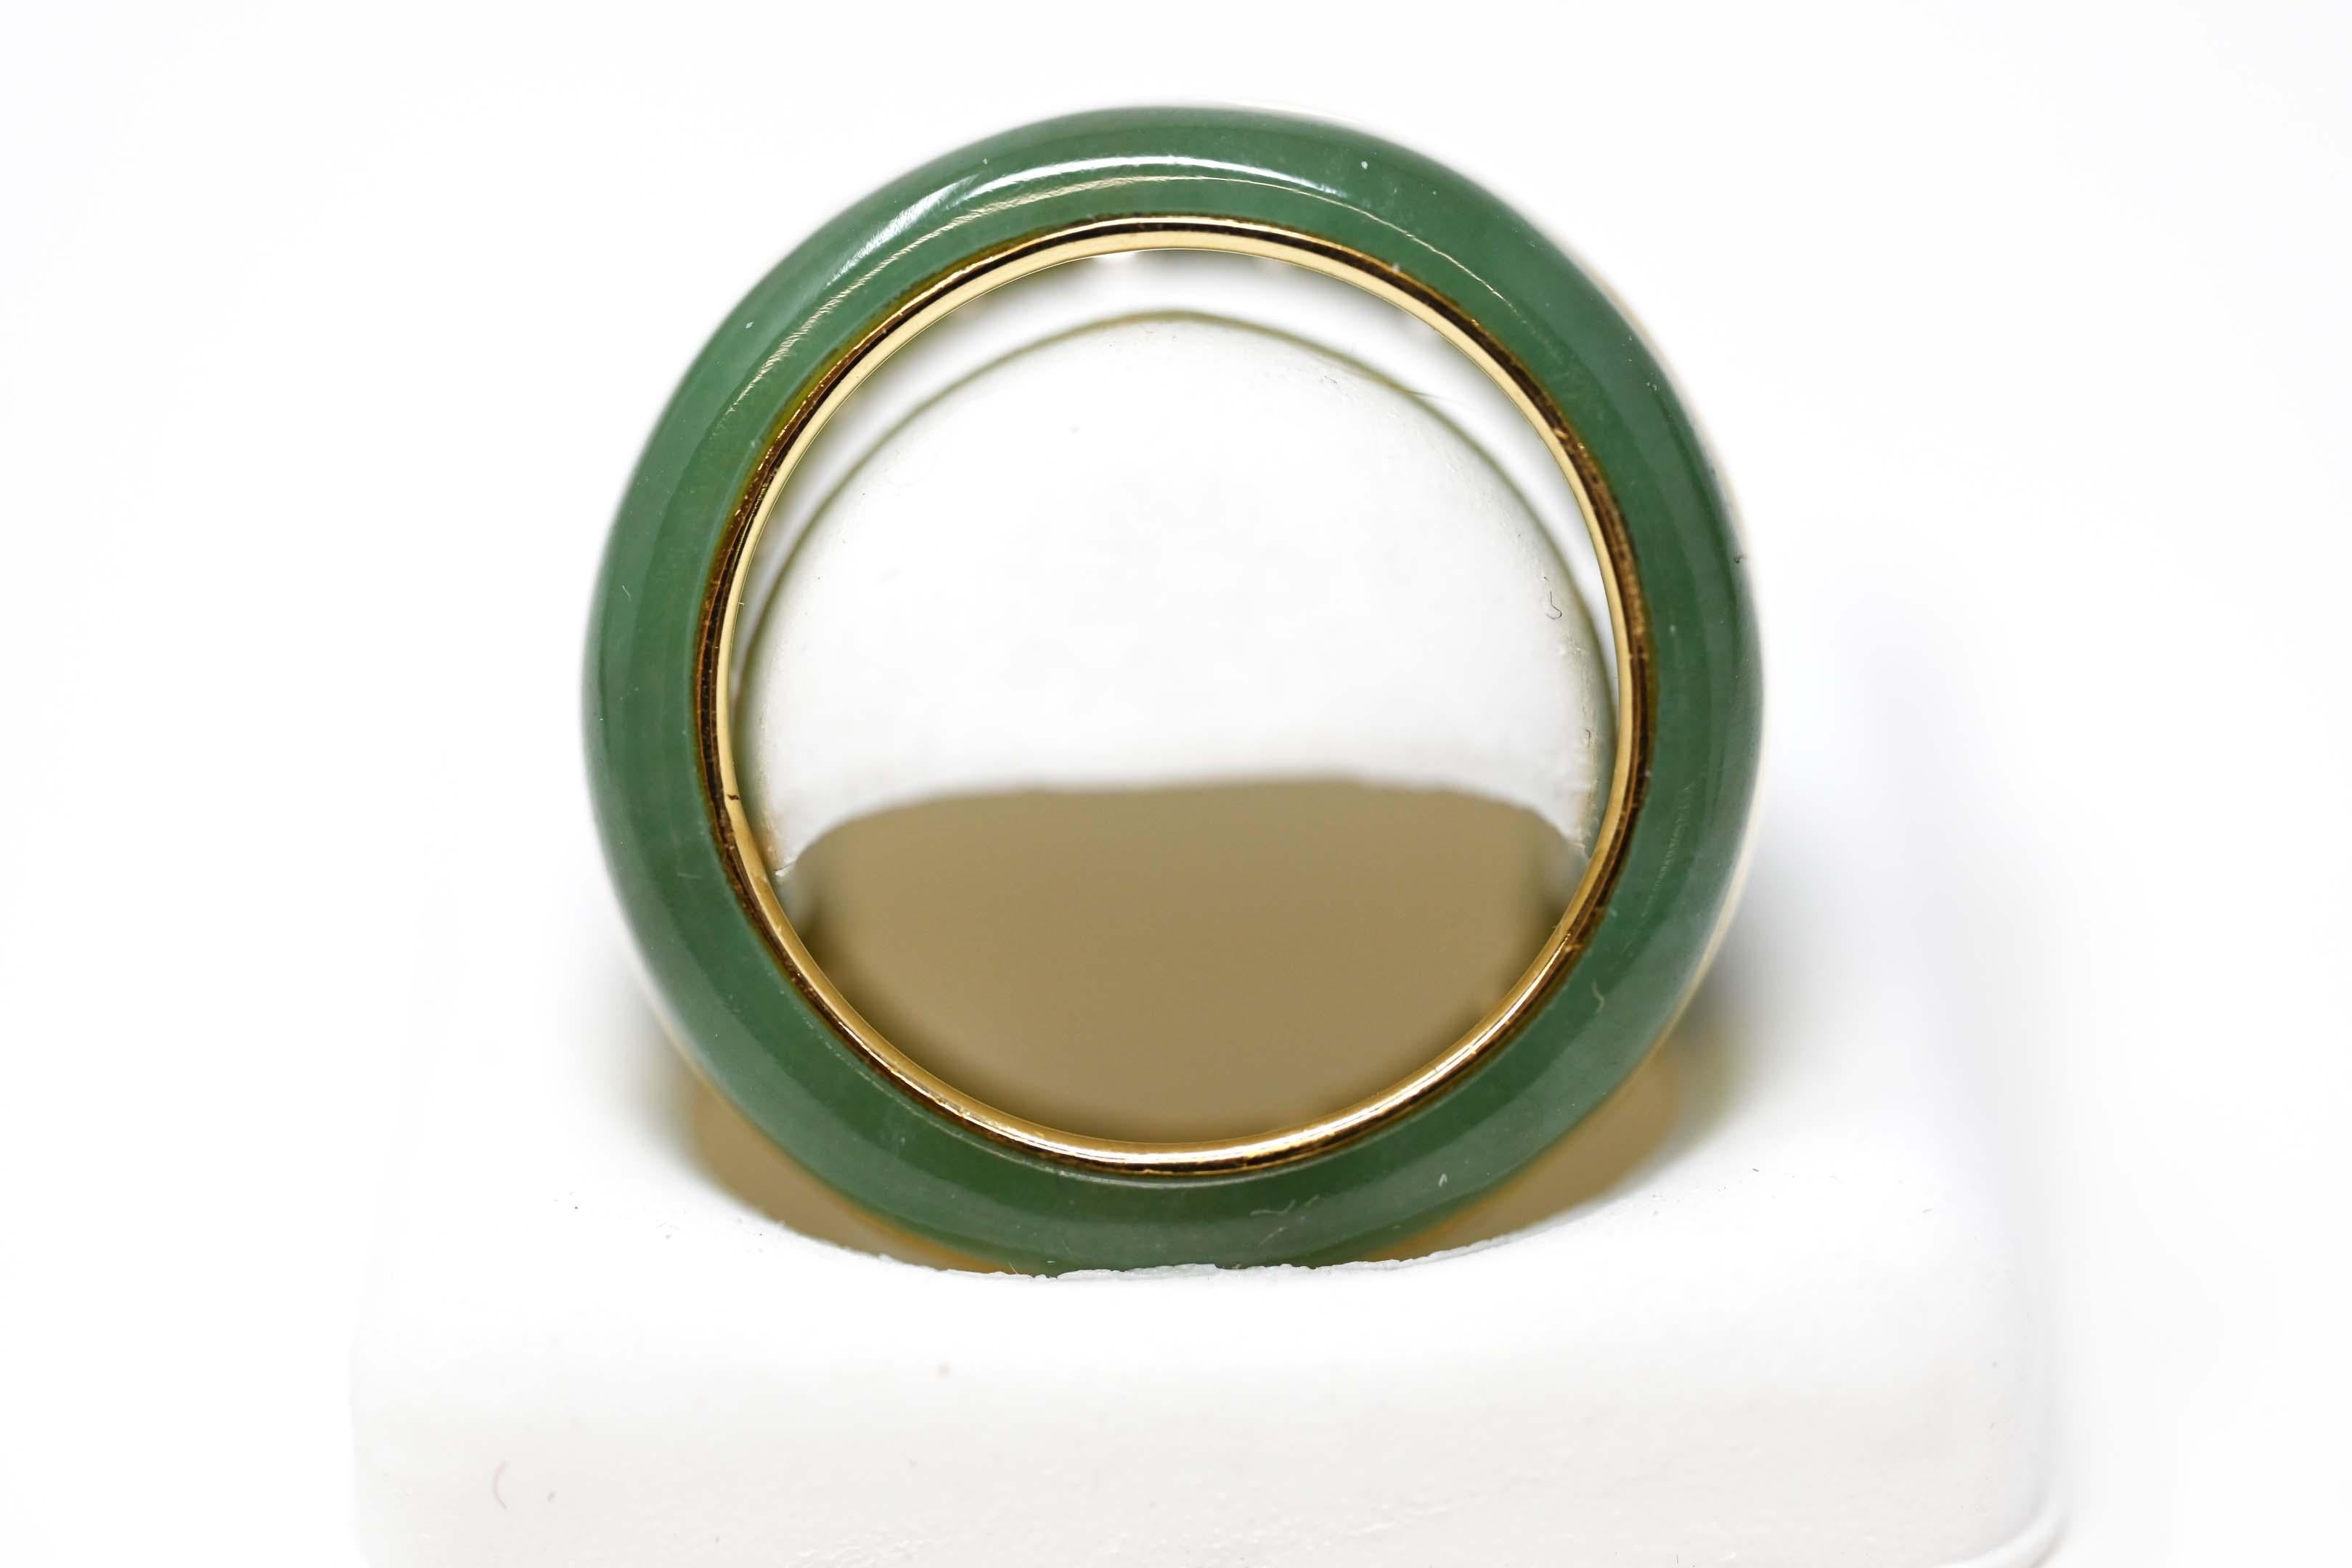 Vintage 14k yellow gold ring size 8. Made of jade and peridot gemstones. Stamped 14k and maker mark inside. The ring cannot resized.
